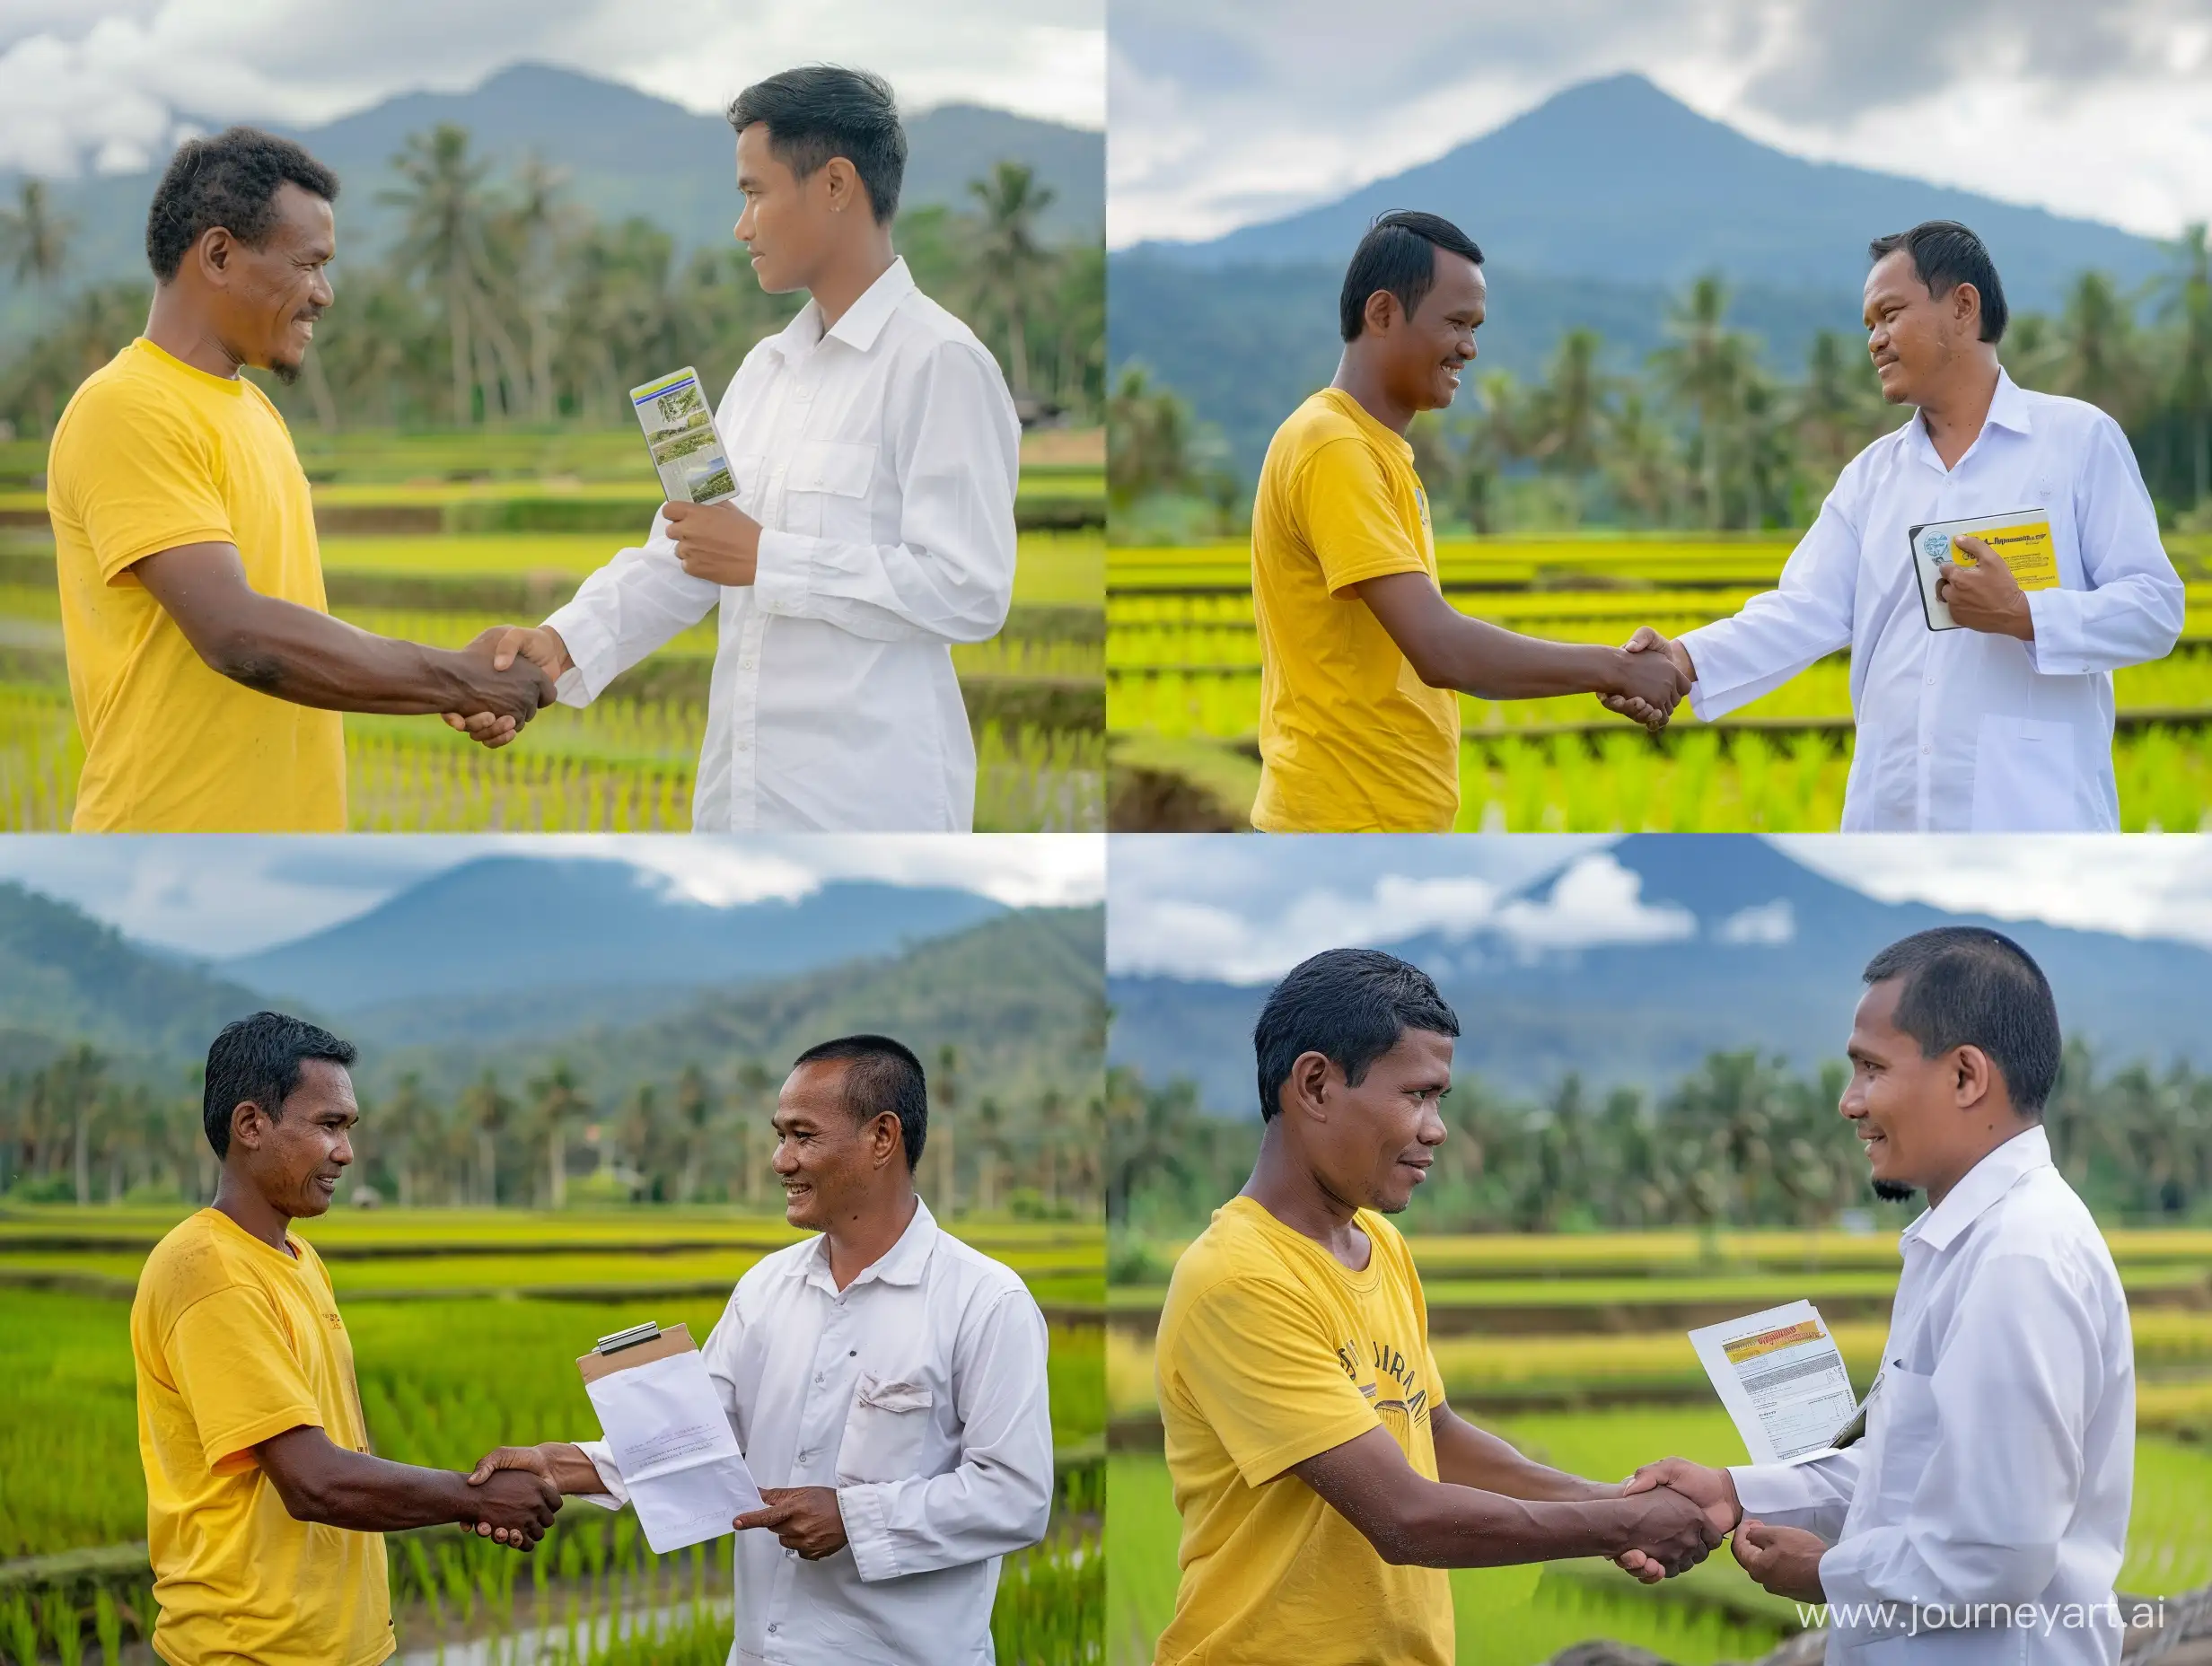 papuan farmer wearing yellow tshirt shakehands with indonesian office worker holding tab, wearing white office shirt, background ricefield with mountain in behind